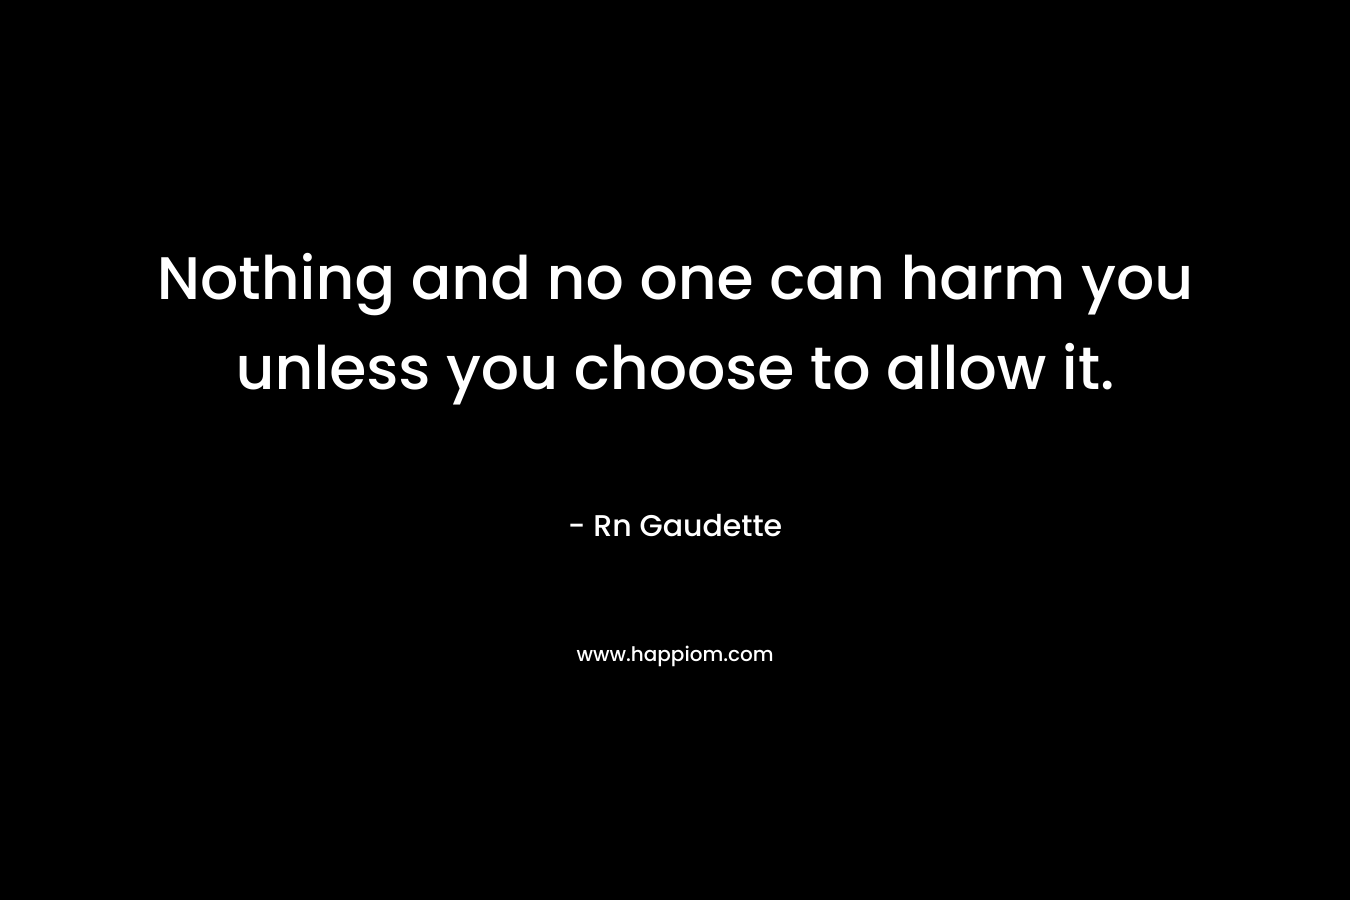 Nothing and no one can harm you unless you choose to allow it. – Rn Gaudette